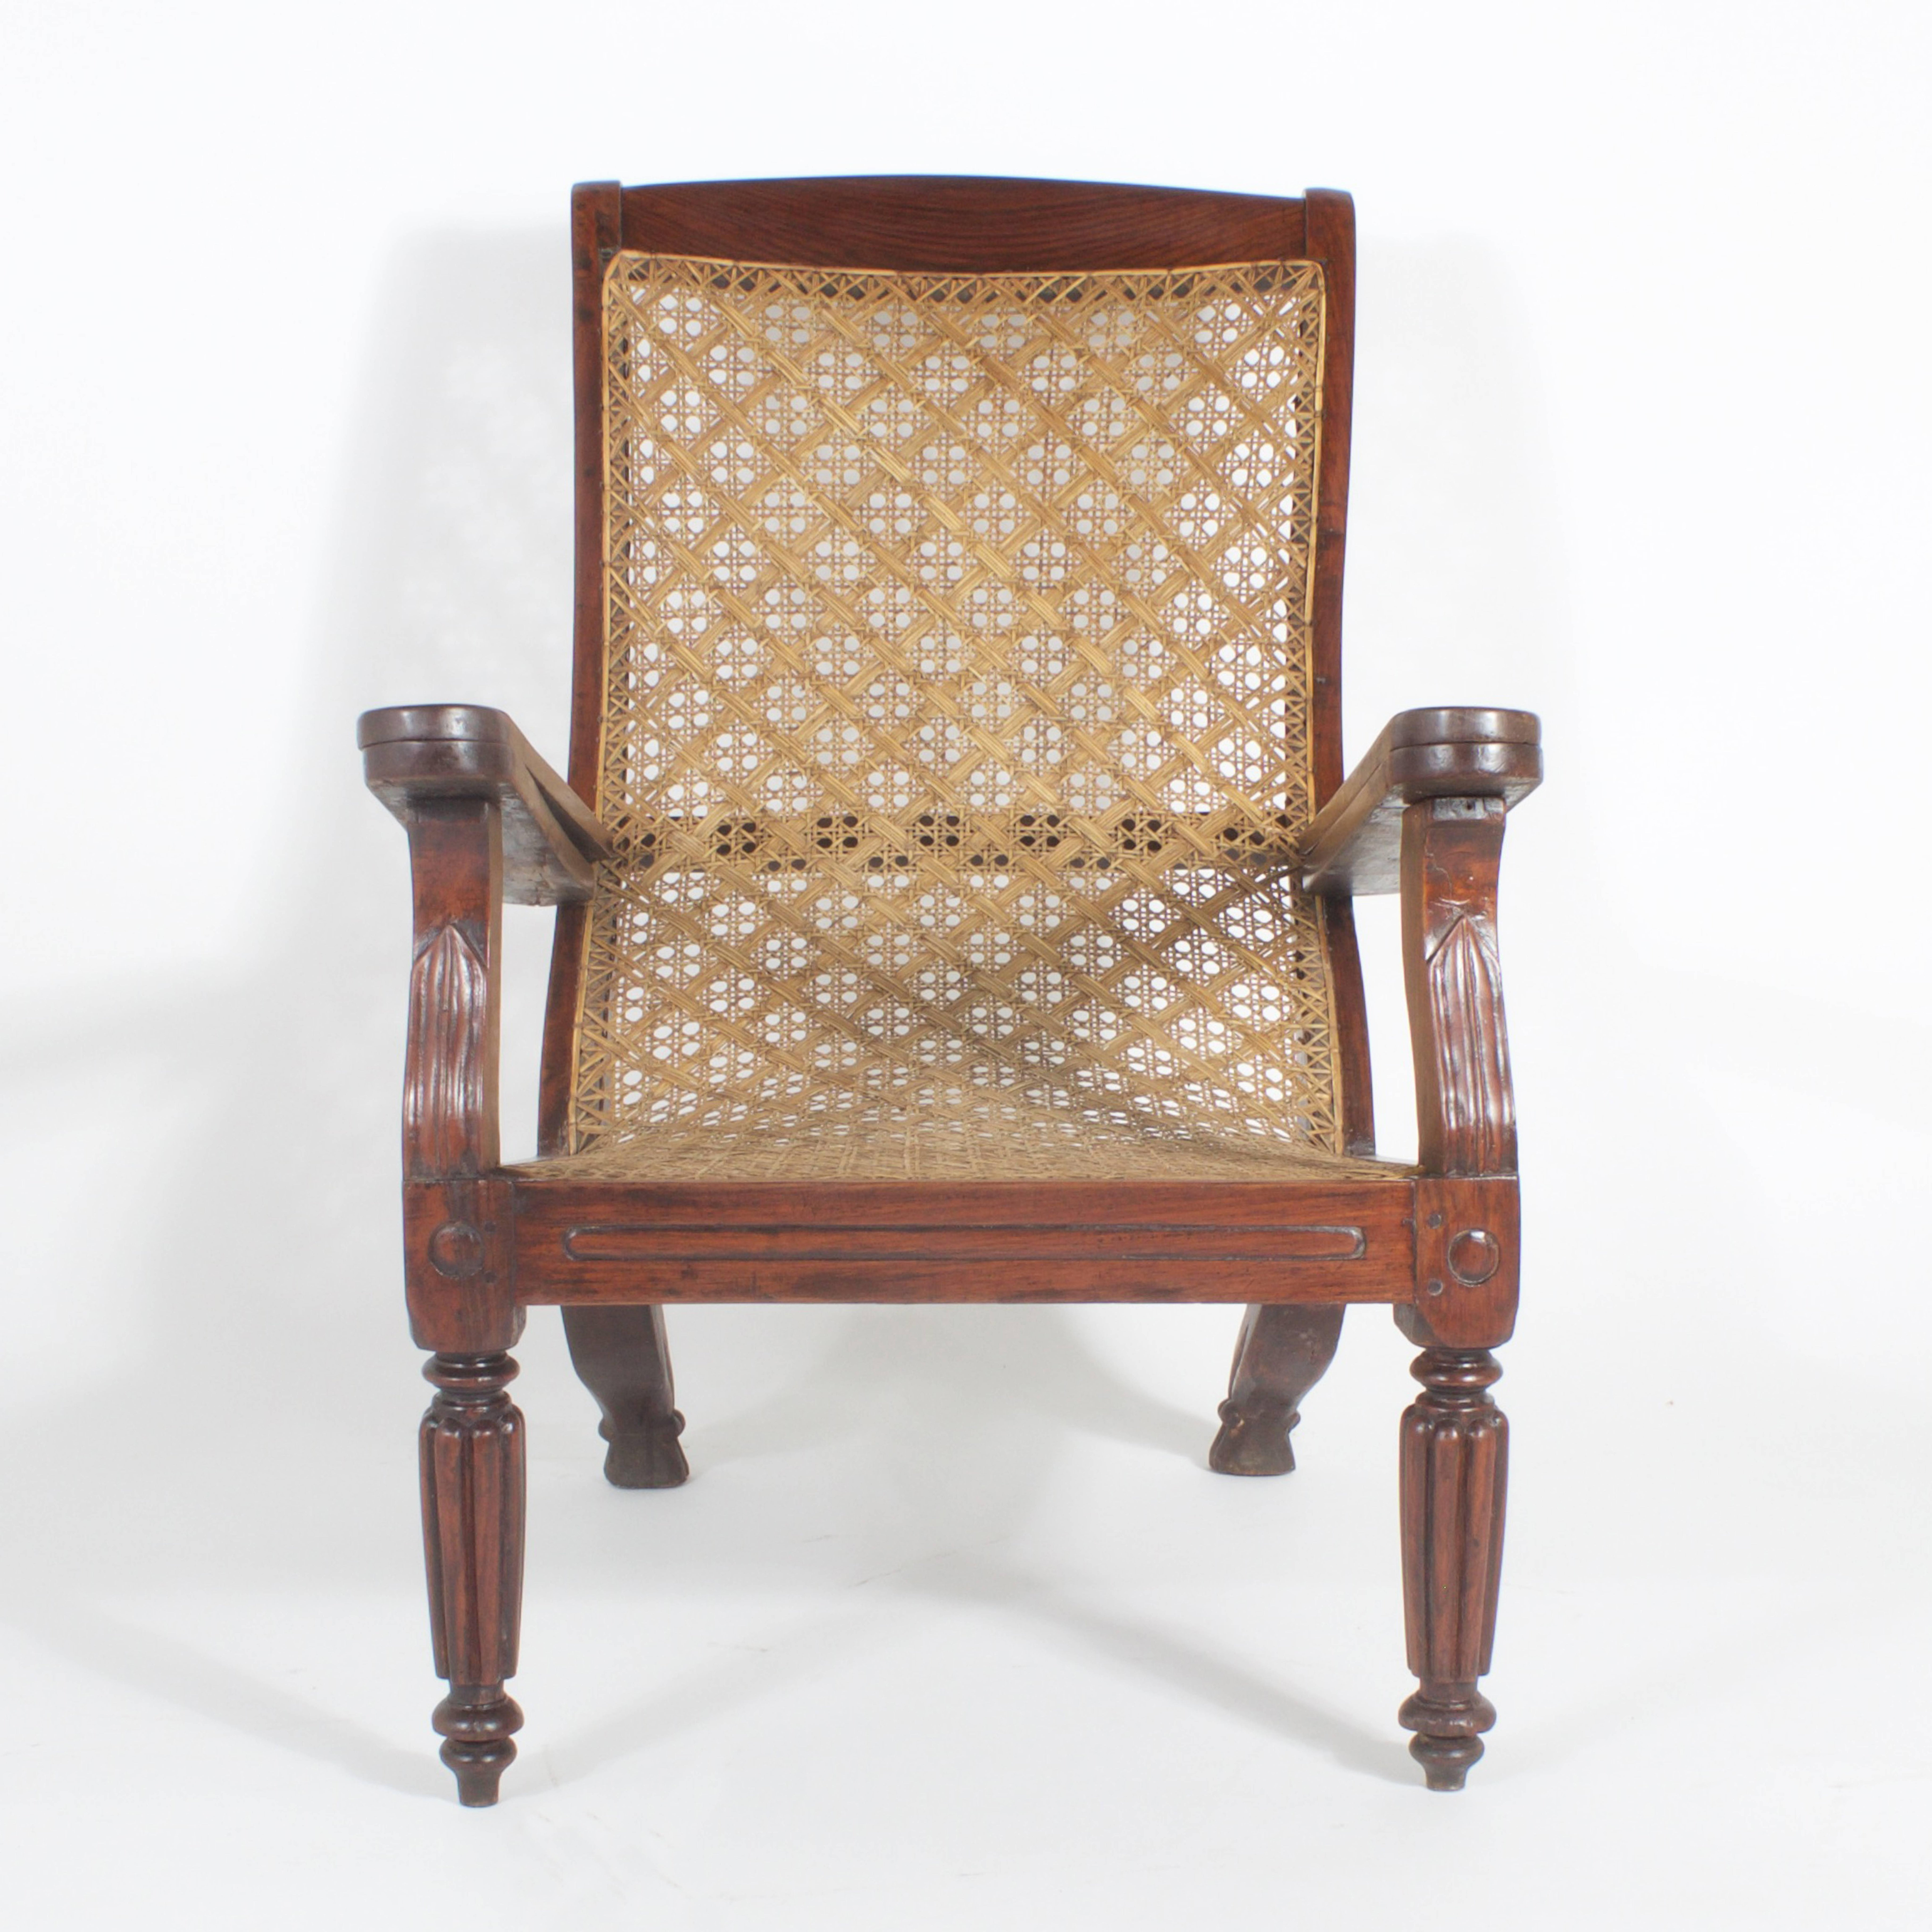 Rare and unusual Portuguese Colonial rosewood planters or plantation chair with a particularly interesting caned seat and back. Featuring turned and carved front and back legs as well as carved leaf arm supports with craved tassel feet. Having